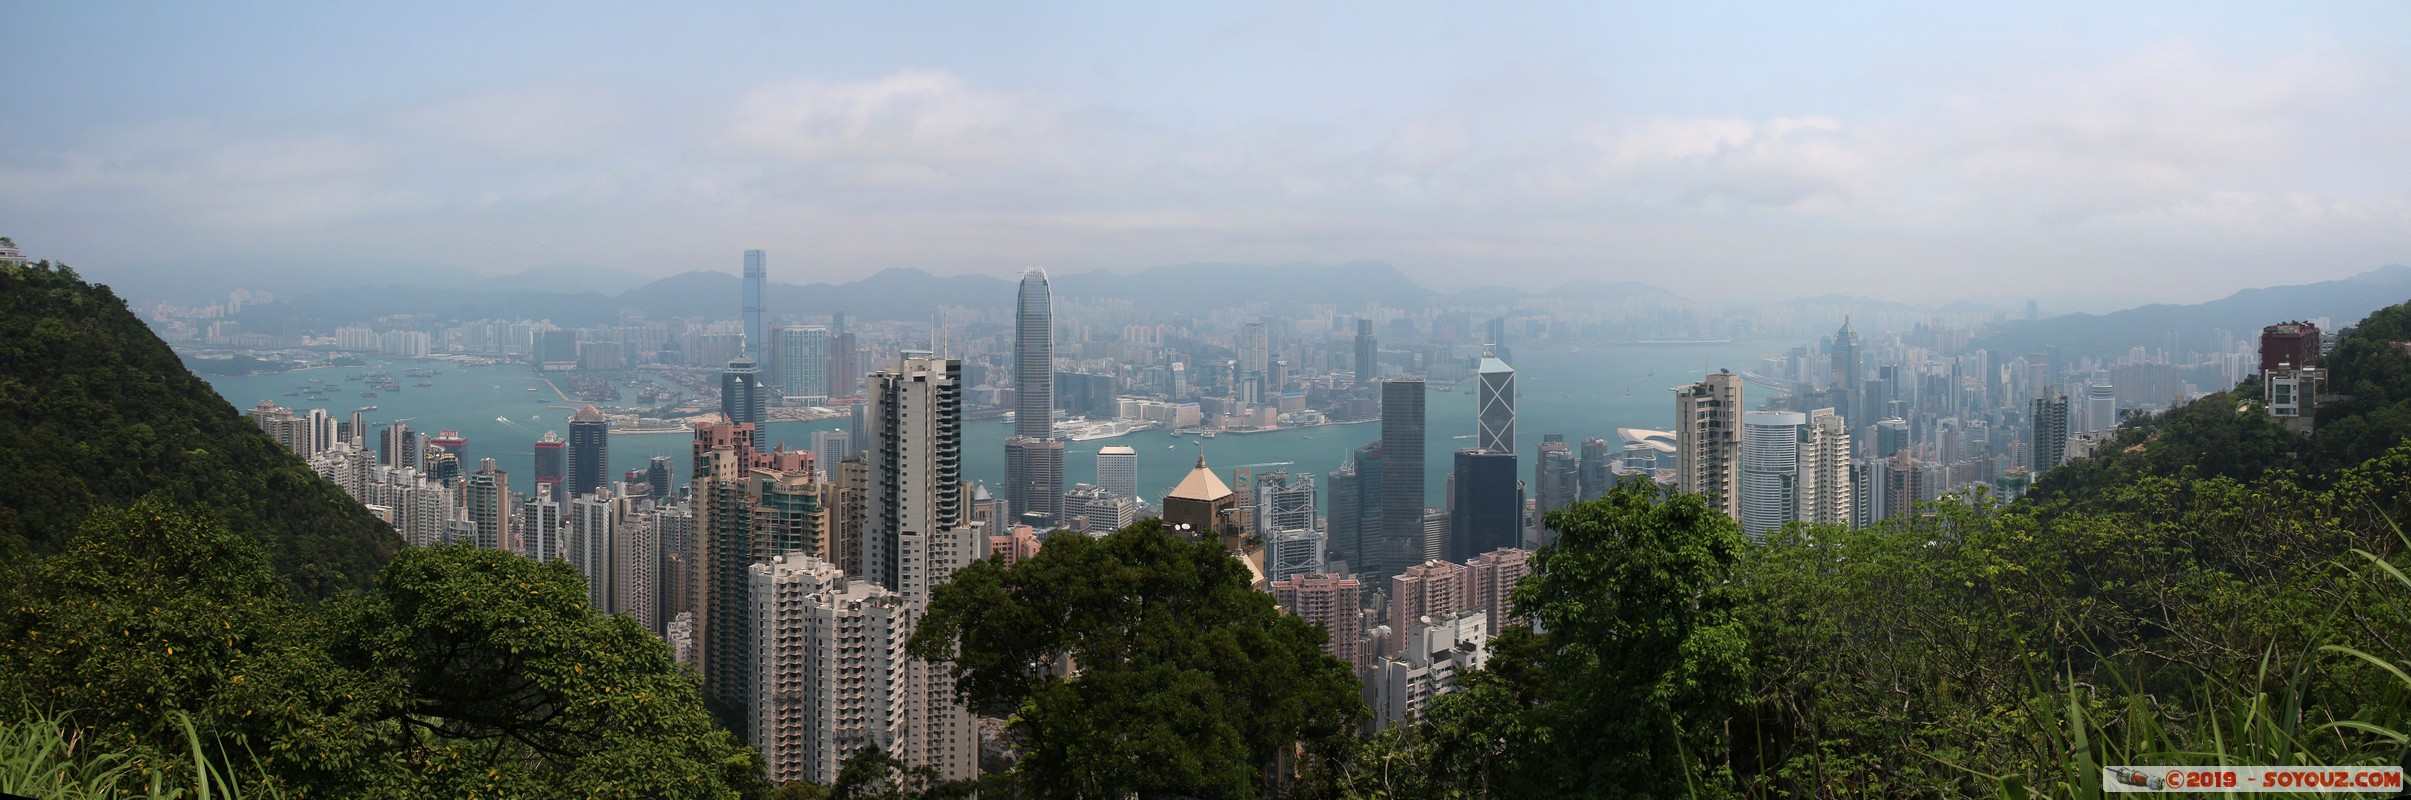 Hong Kong - Panorama from Victoria Peak
Mots-clés: Central and Western Central District geo:lat=22.27078071 geo:lon=114.15099476 geotagged HKG Hong Kong skyline skyscraper panorama Victoria Harbour Sky 100 International Finance Centre